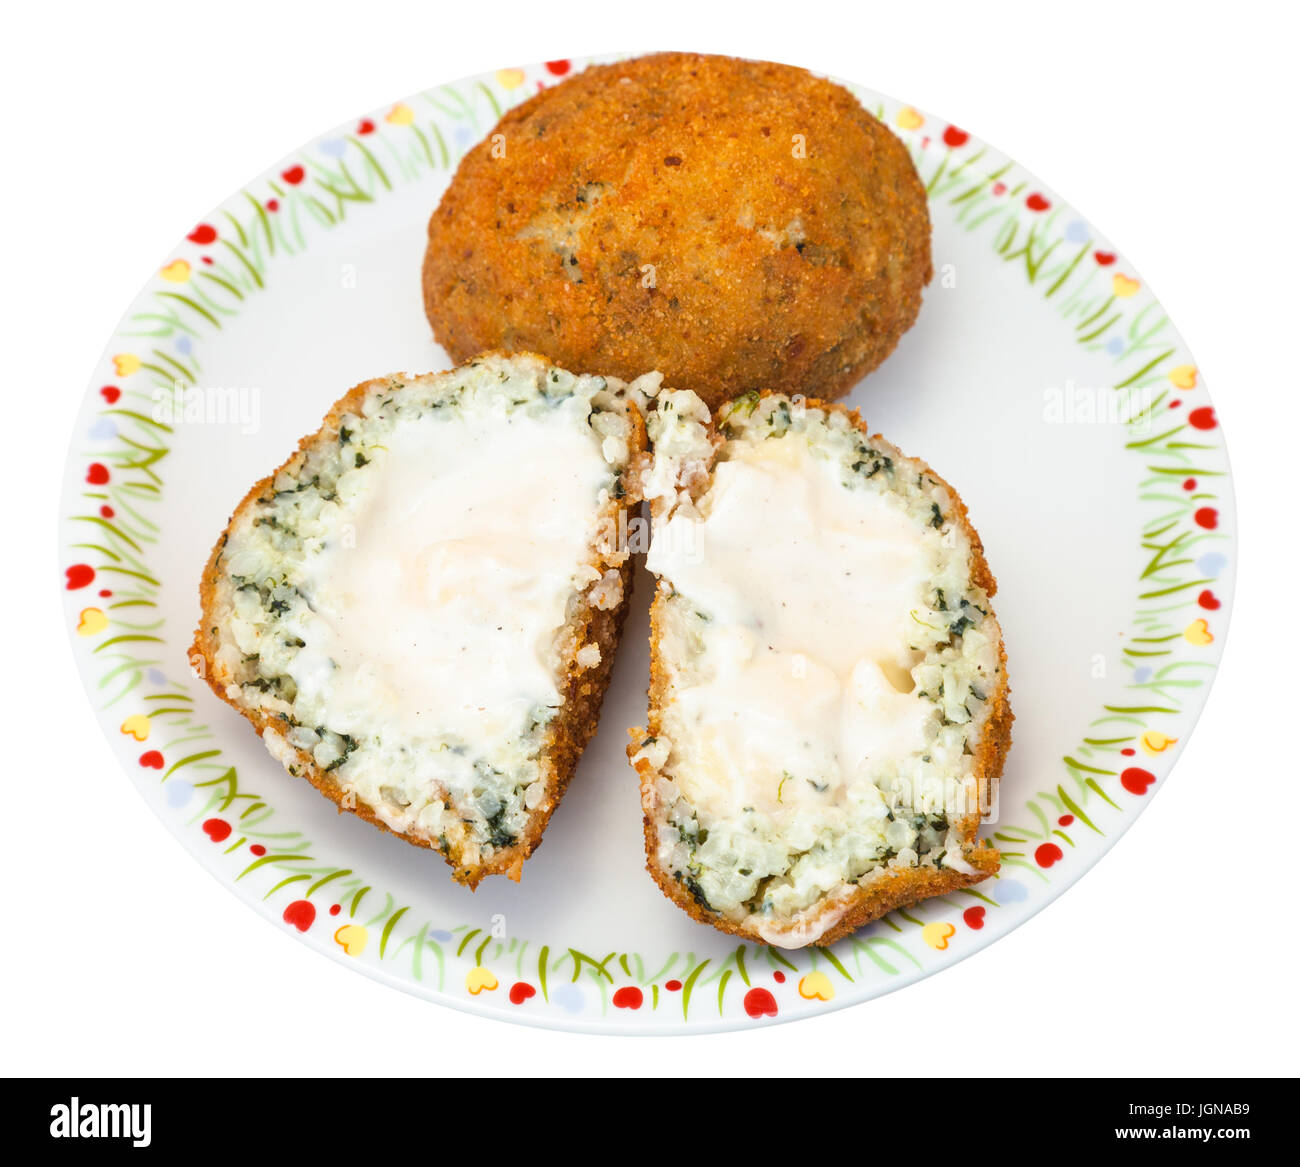 traditional sicilian street food - spinach and sauce stuffed rice balls arancini on plate isolated on white background Stock Photo